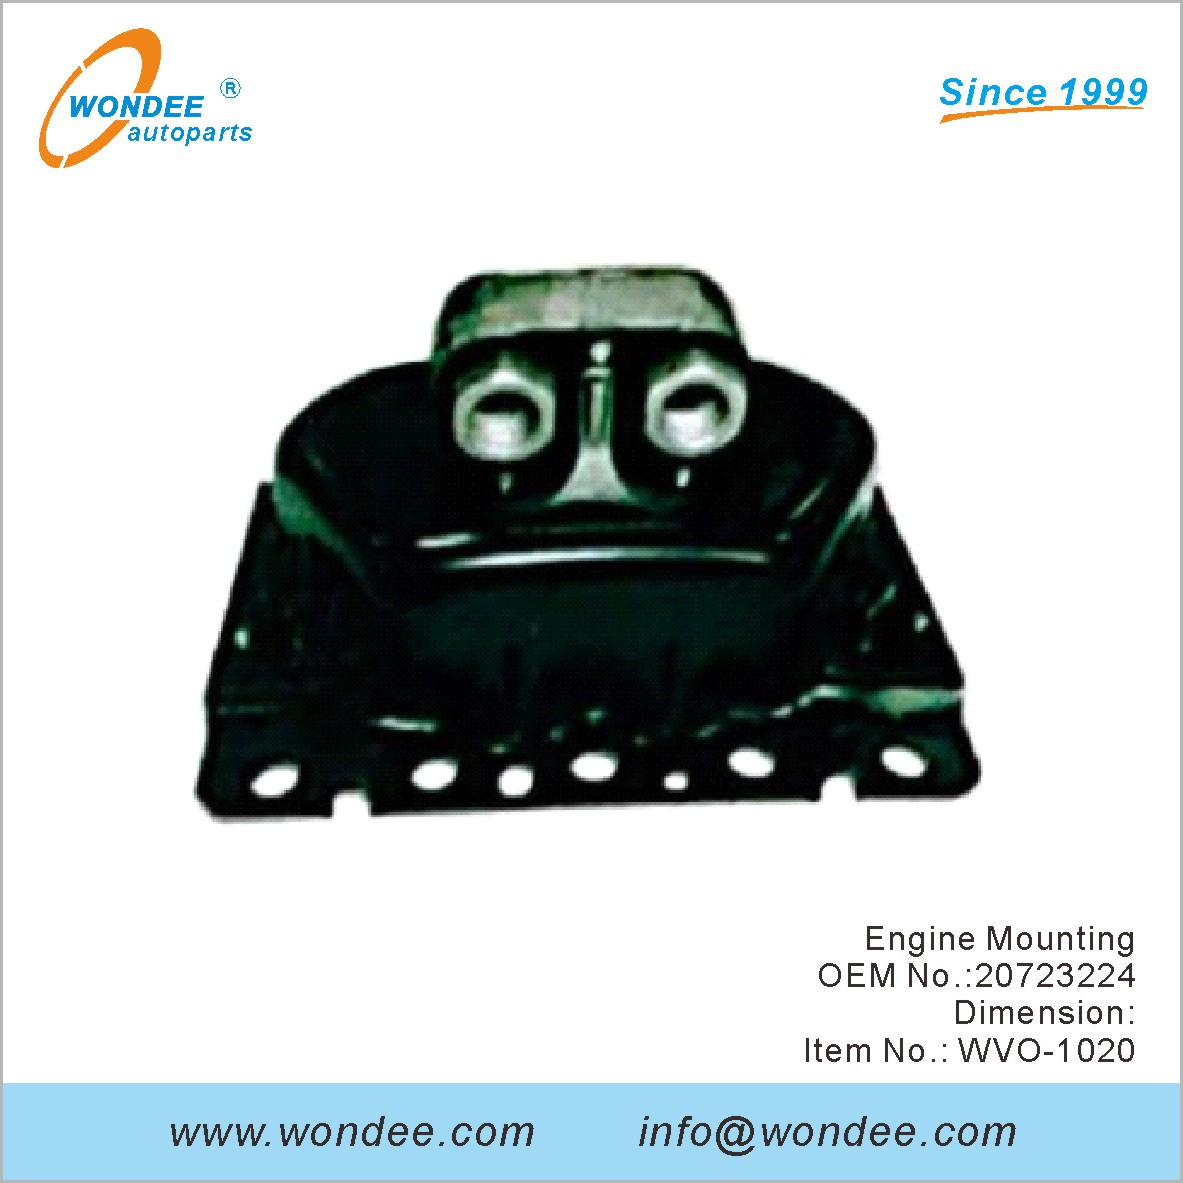 Engine Mounting OEM 20723224 for Volvo from WONDEE